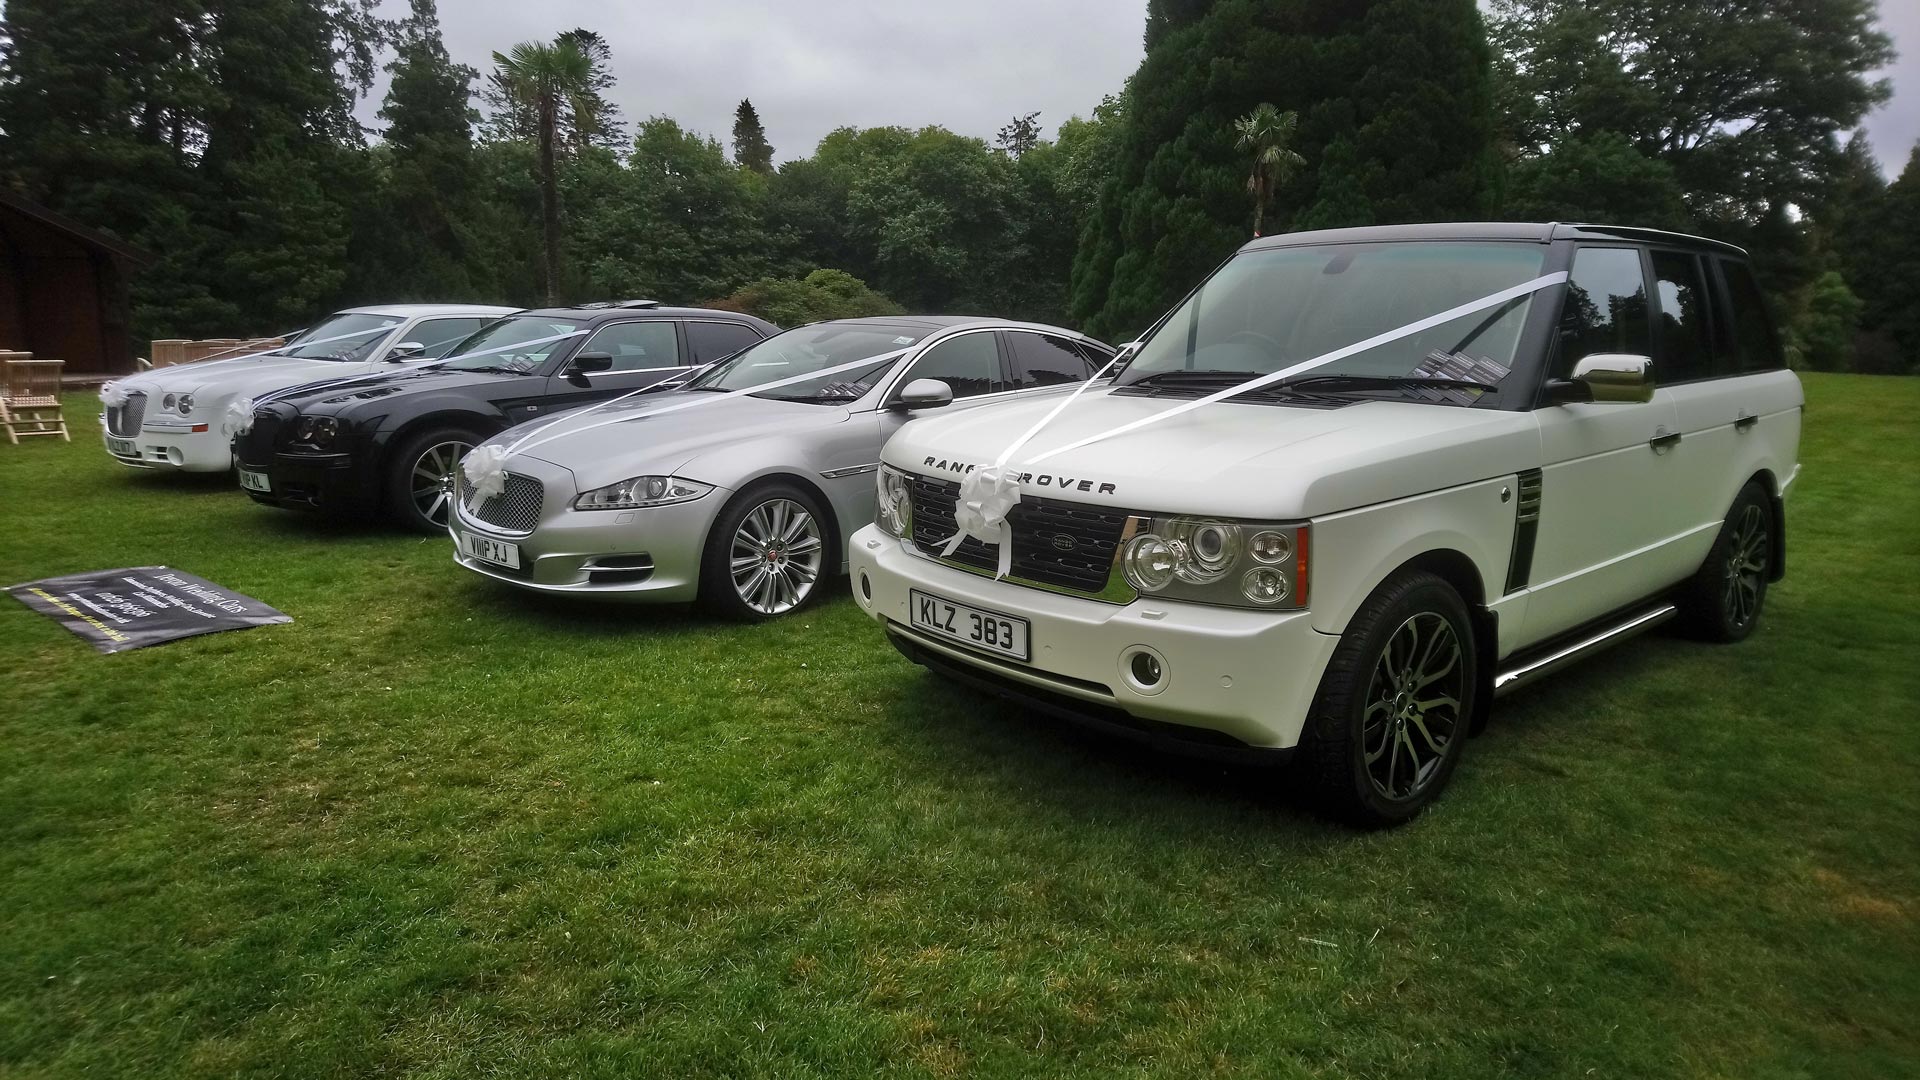 View of our range rover used for weddings 